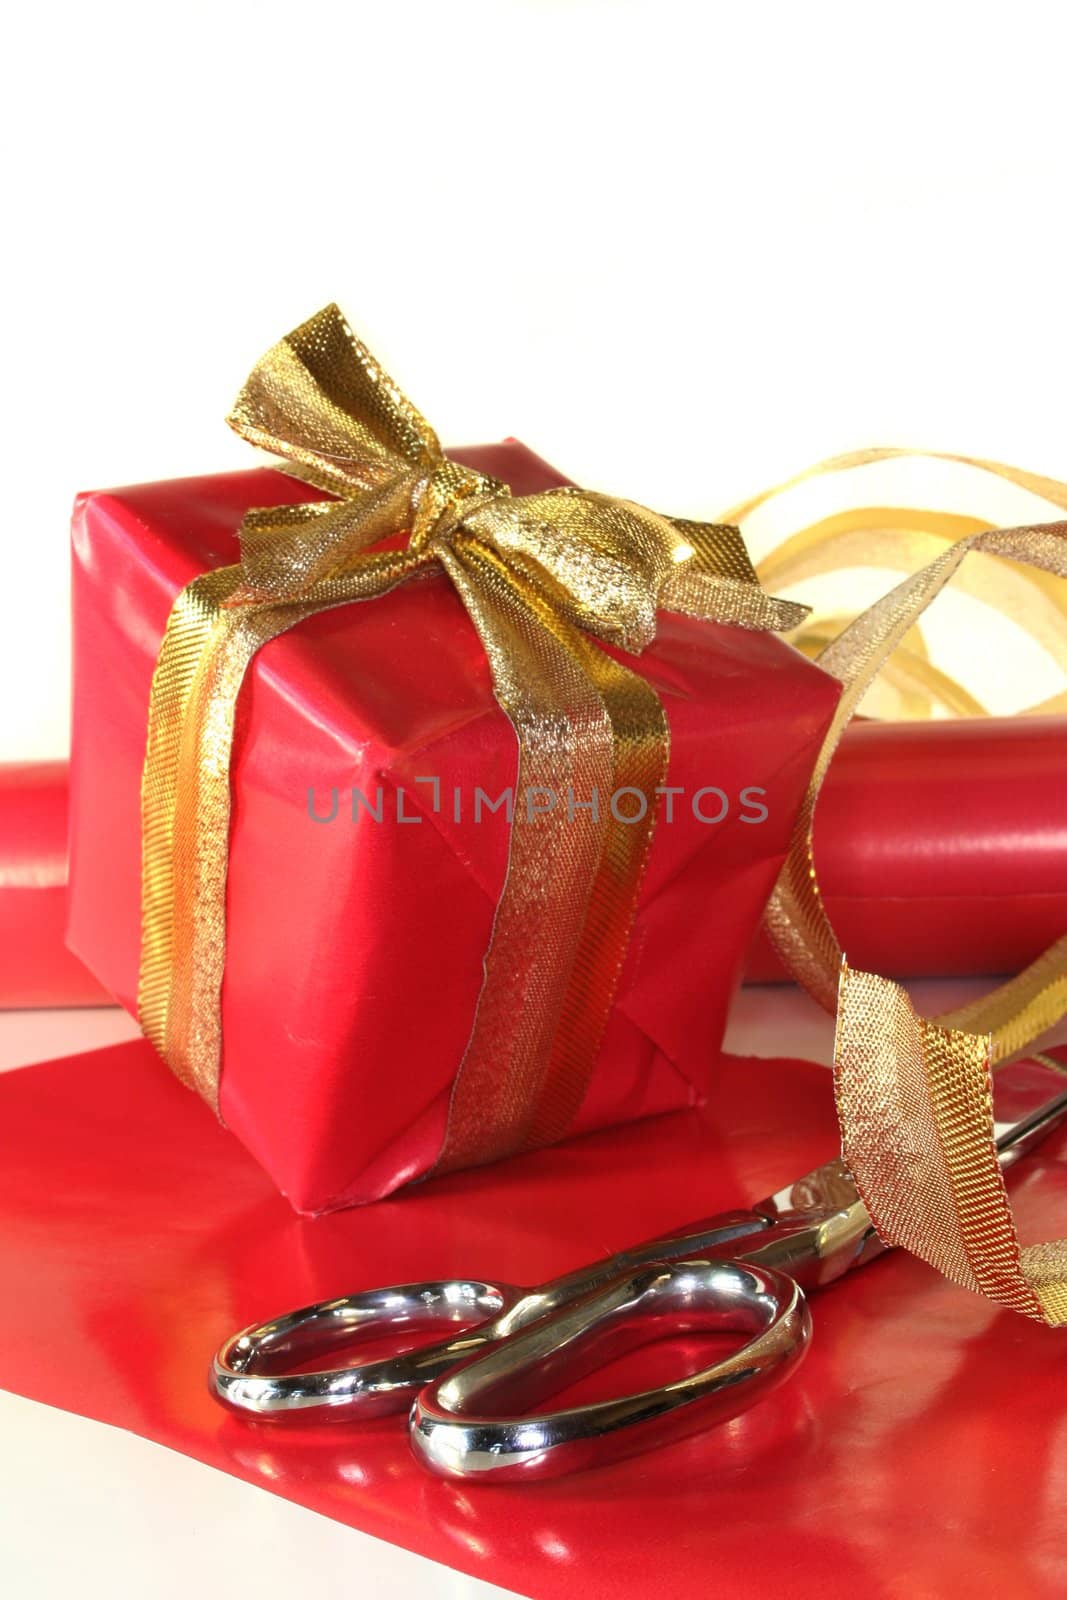 various utensils used to wrap a gift